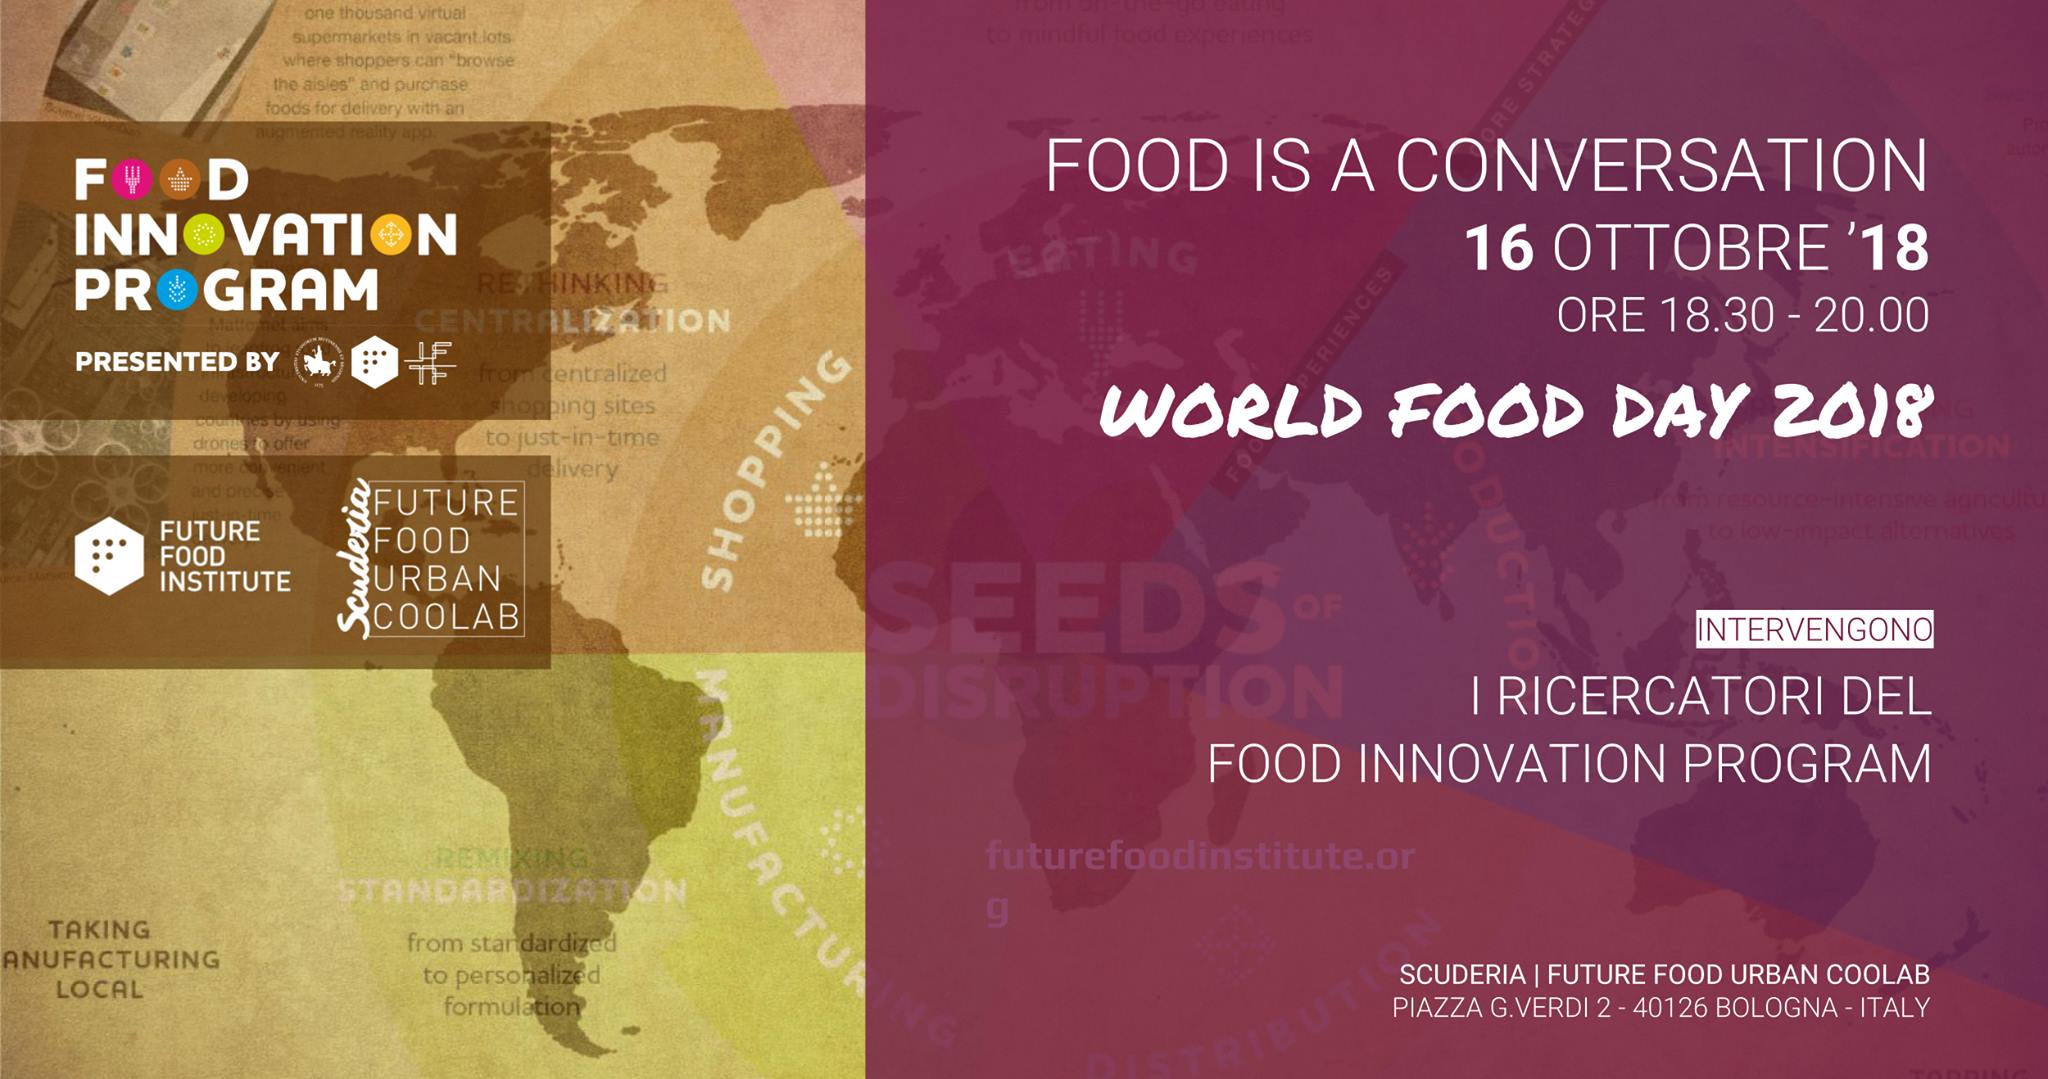 Food is a Conversation: World Food Day 2018